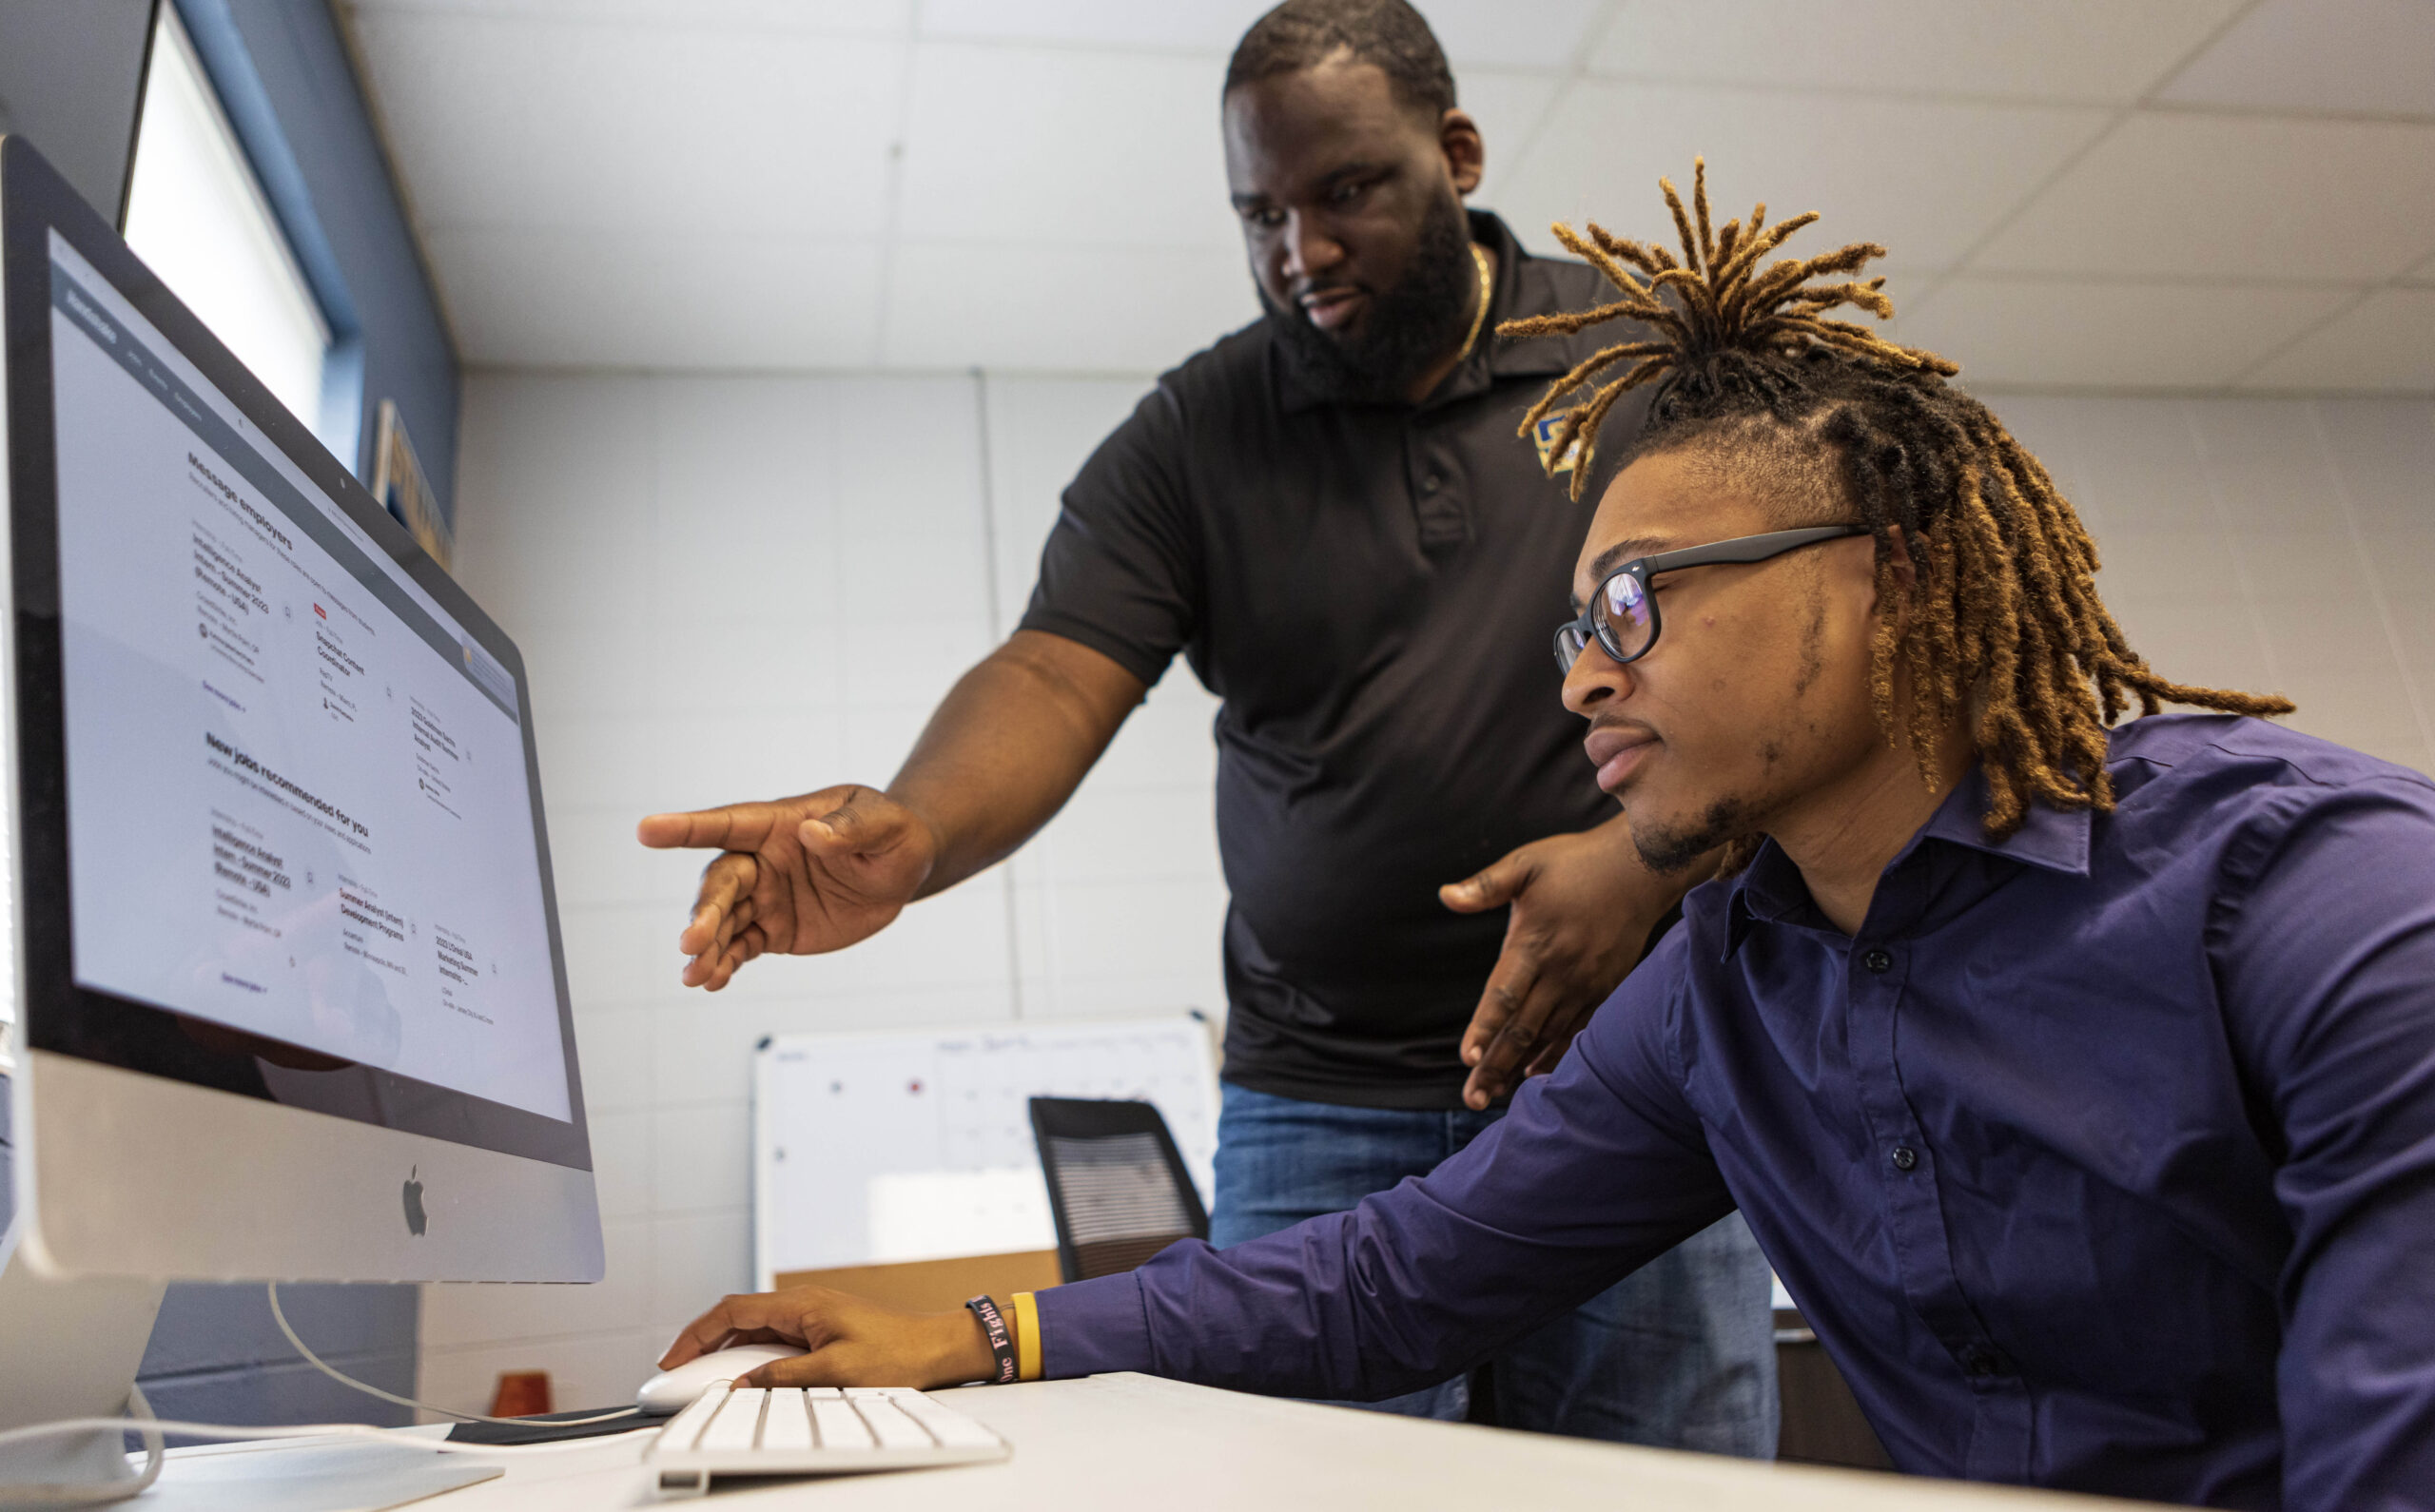 A Black man points to a computer screen as a young black male college student looks on.